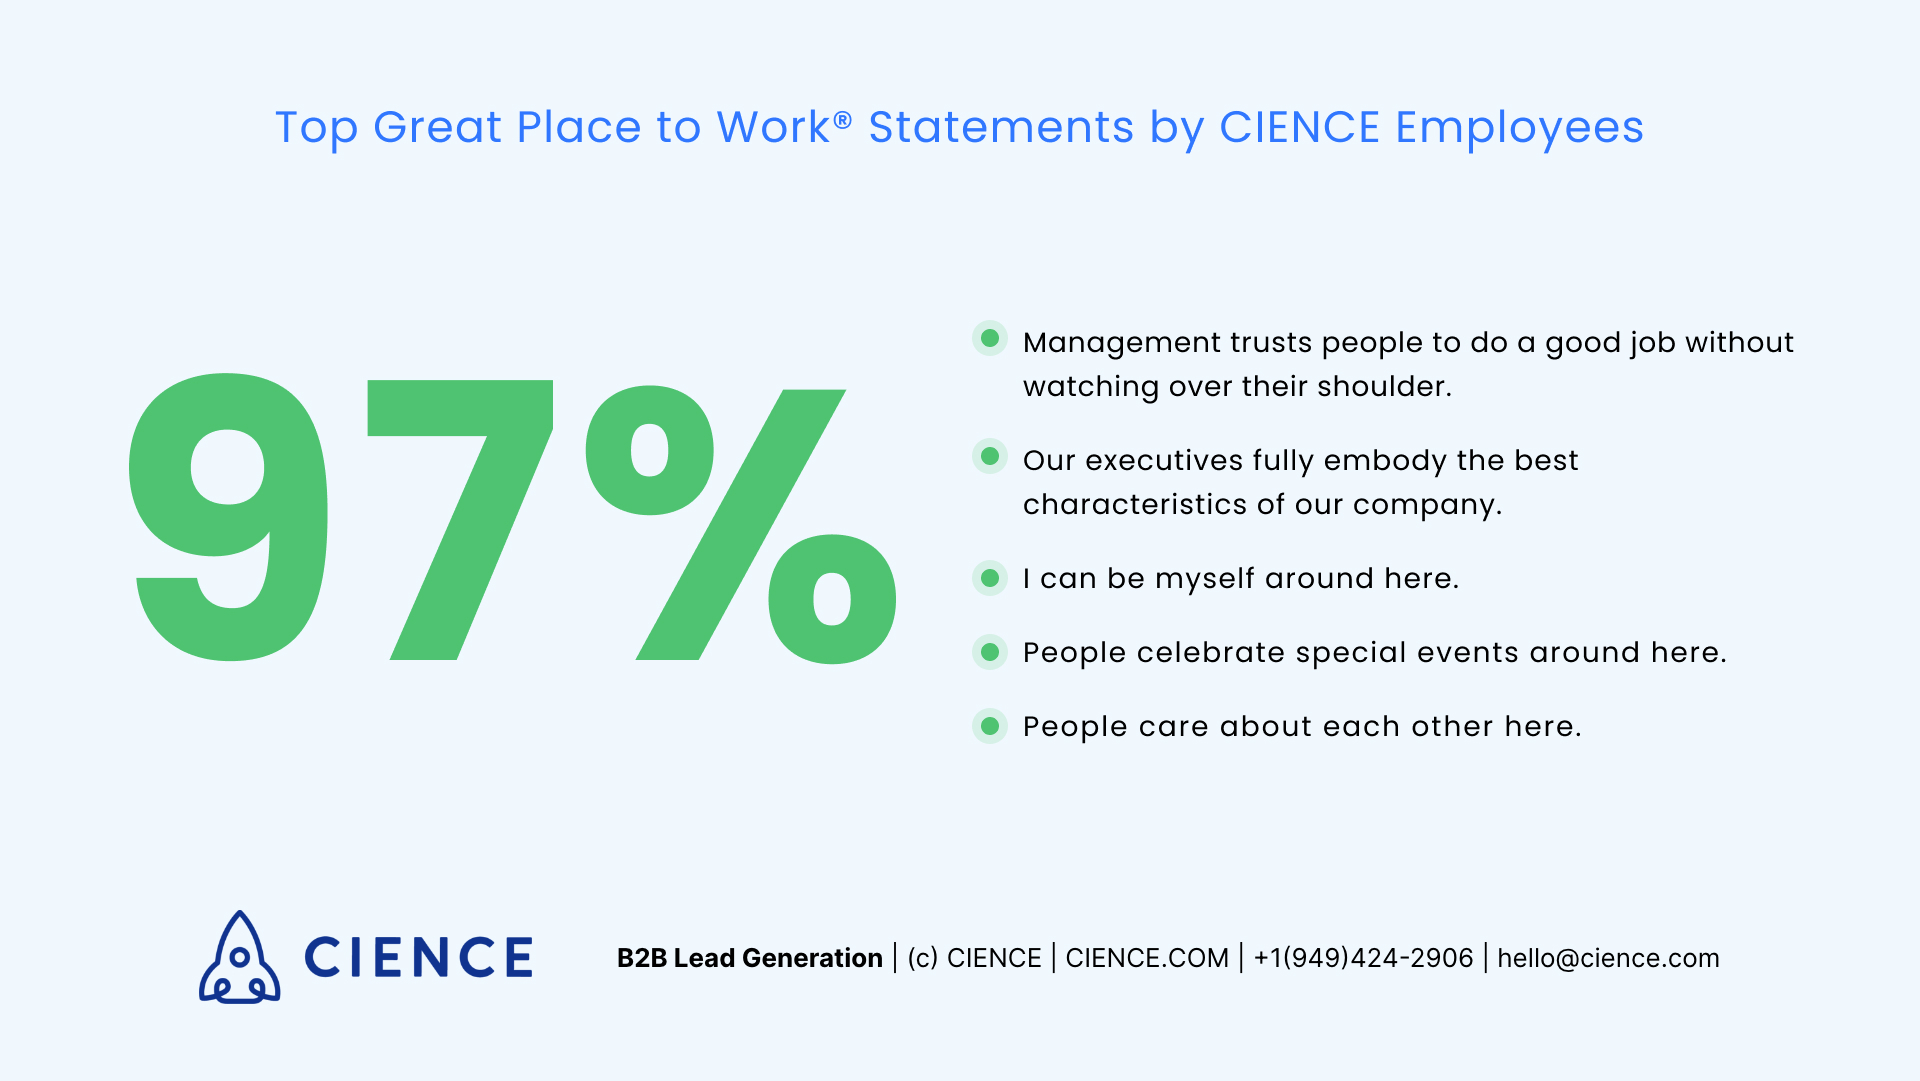 CIENCE Employees Statements - Great Place to Work